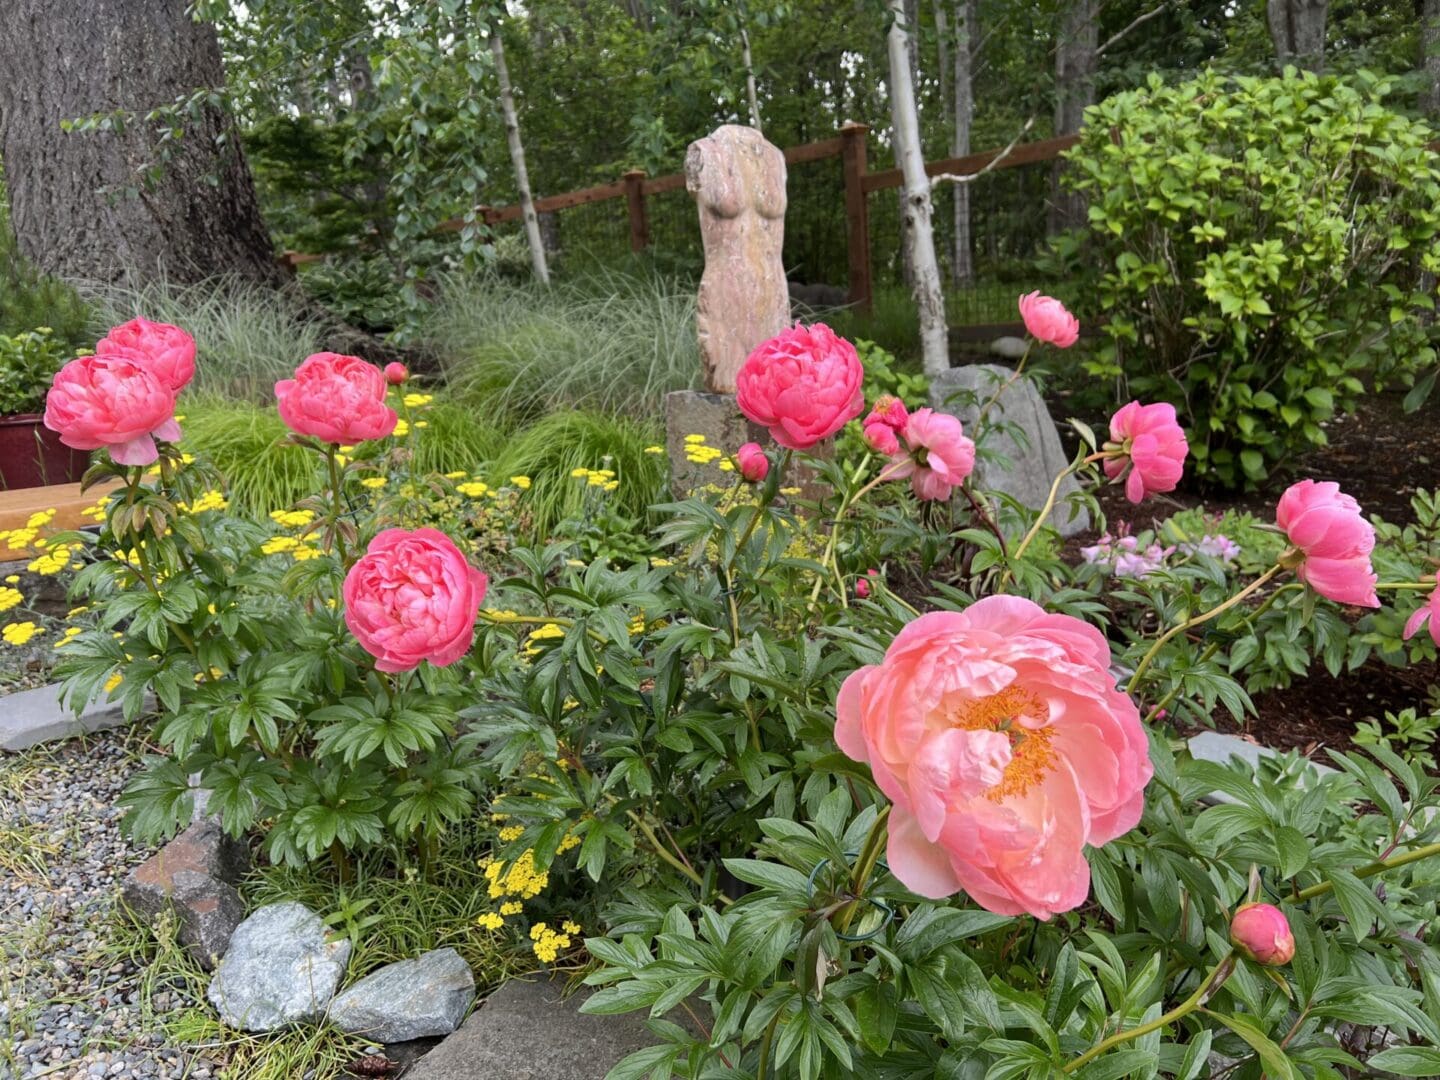 A garden with pink flowers and green plants.